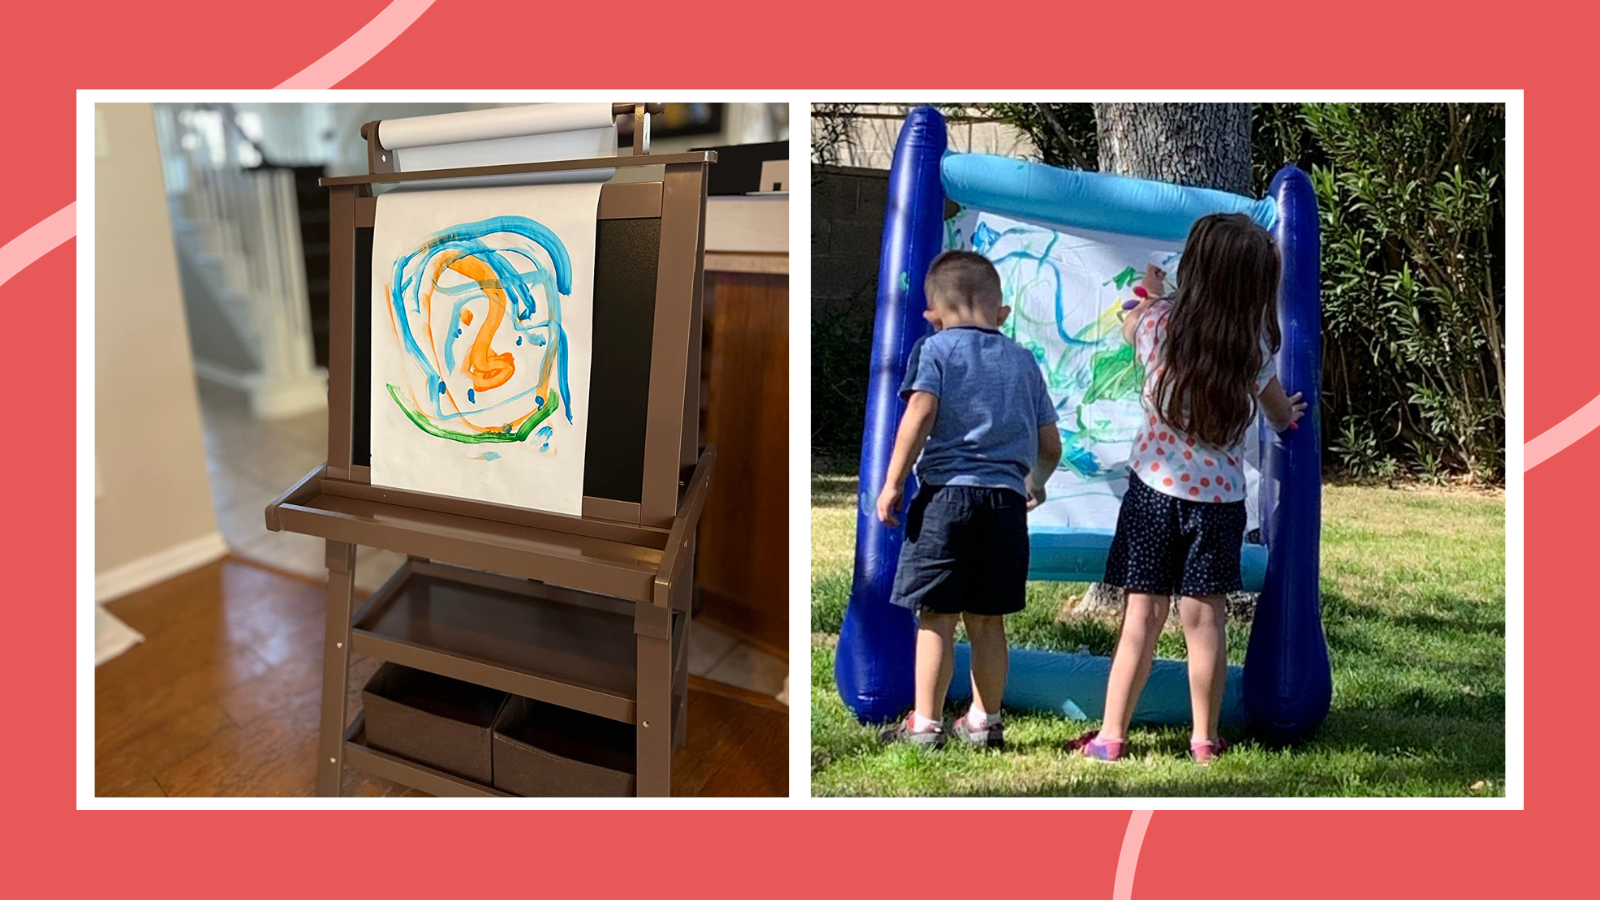 Examples of the best art easels for kids including an inflatable easel and a wooden easel with storage bins.